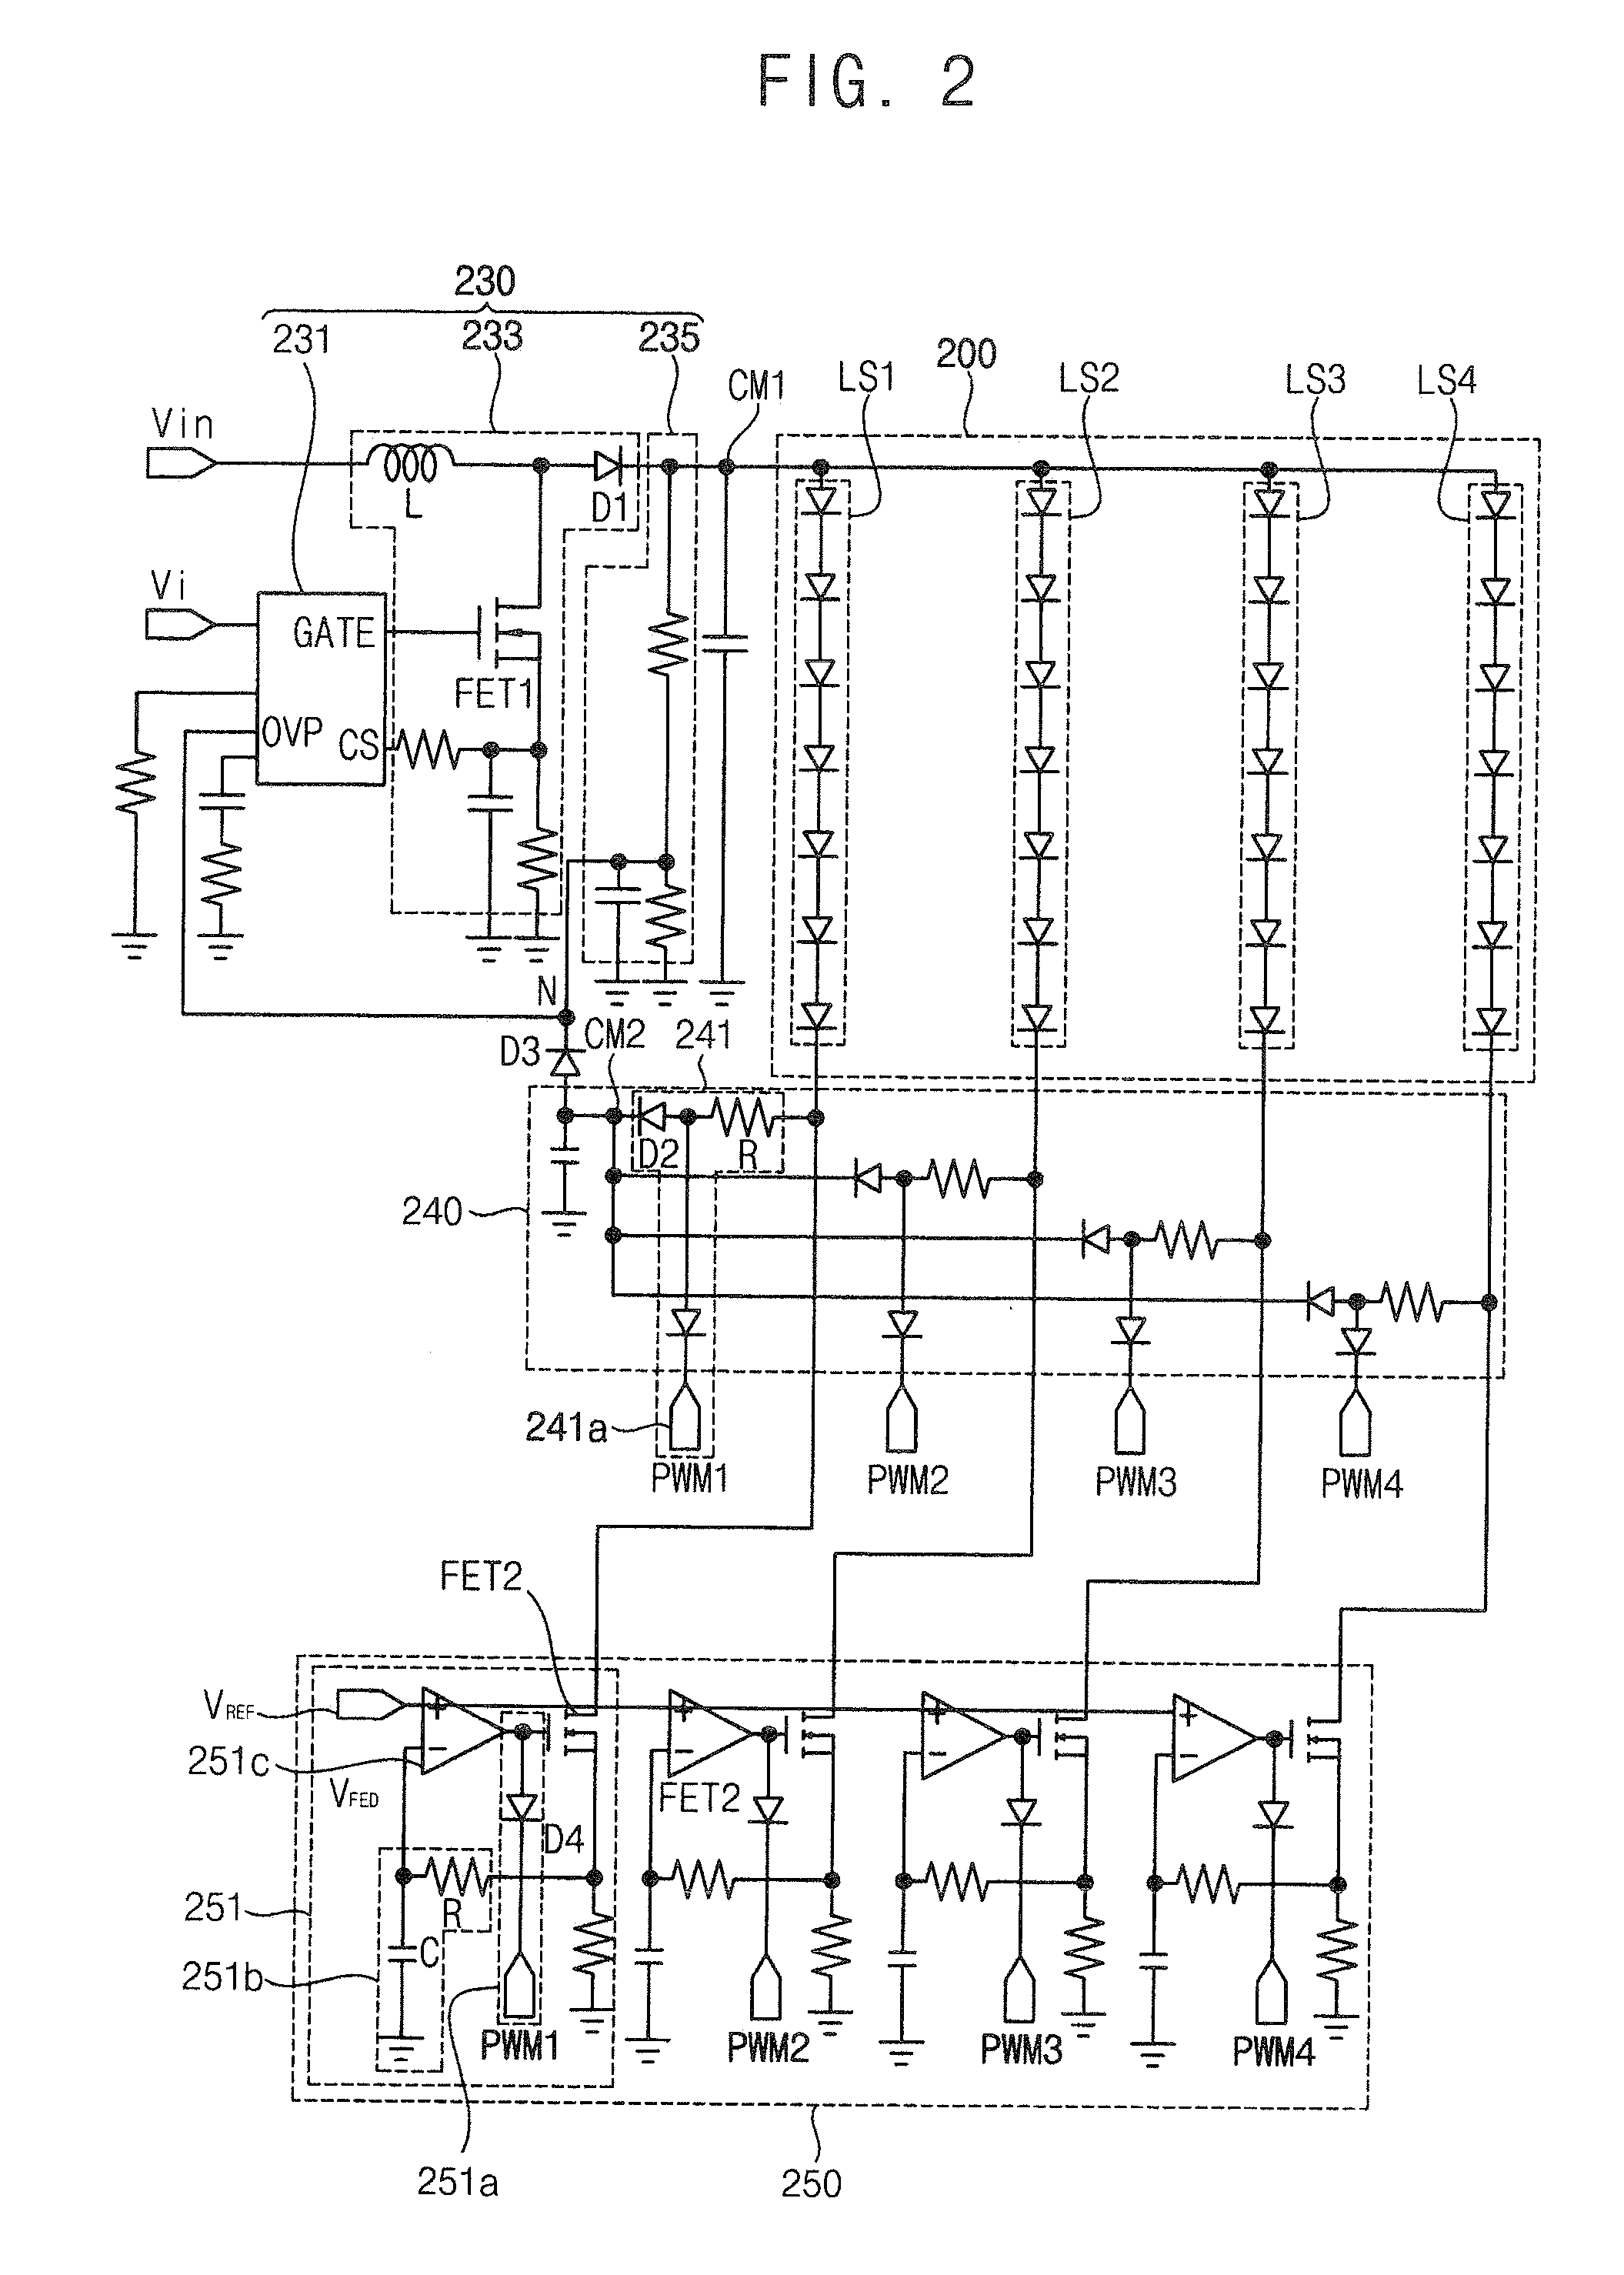 Method of driving a light source, light source apparatus for performing the method, and display apparatus having the light source apparatus